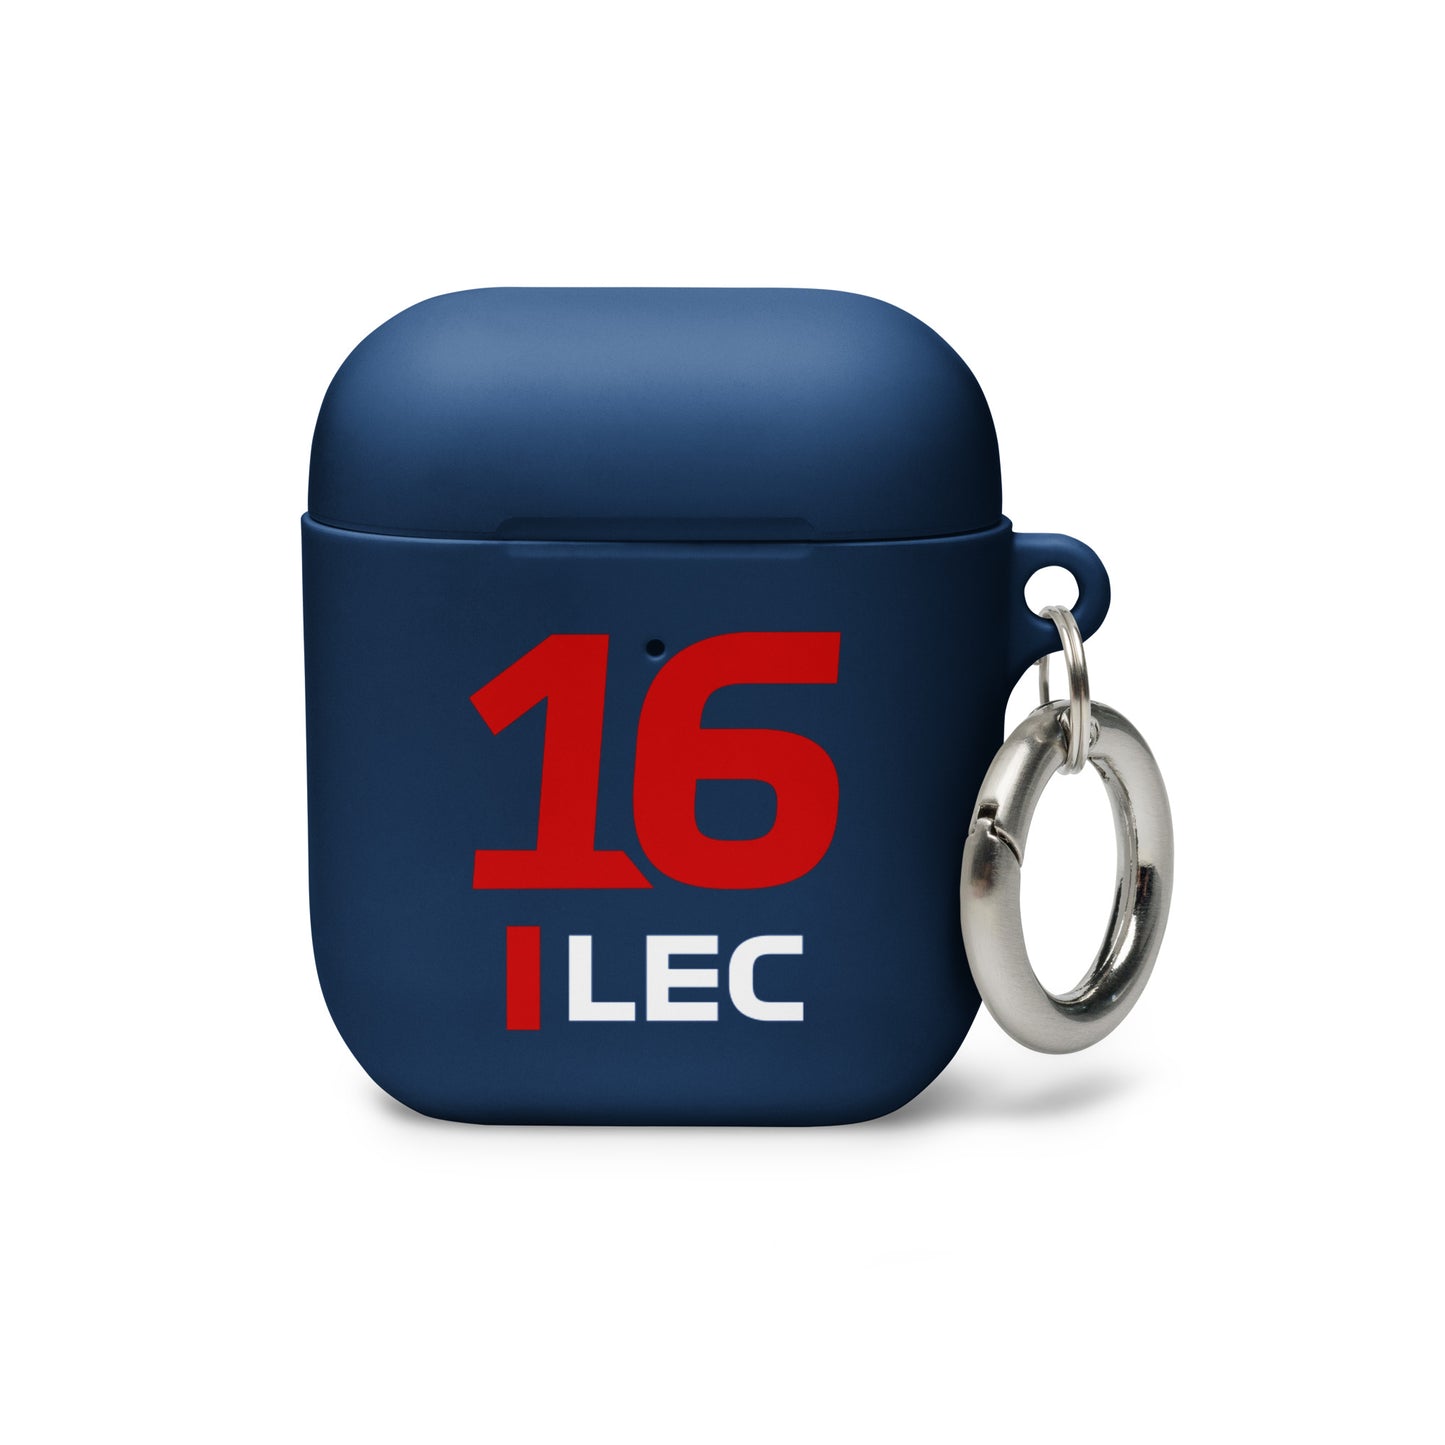 Charles Leclerc AirPods Case navy blue